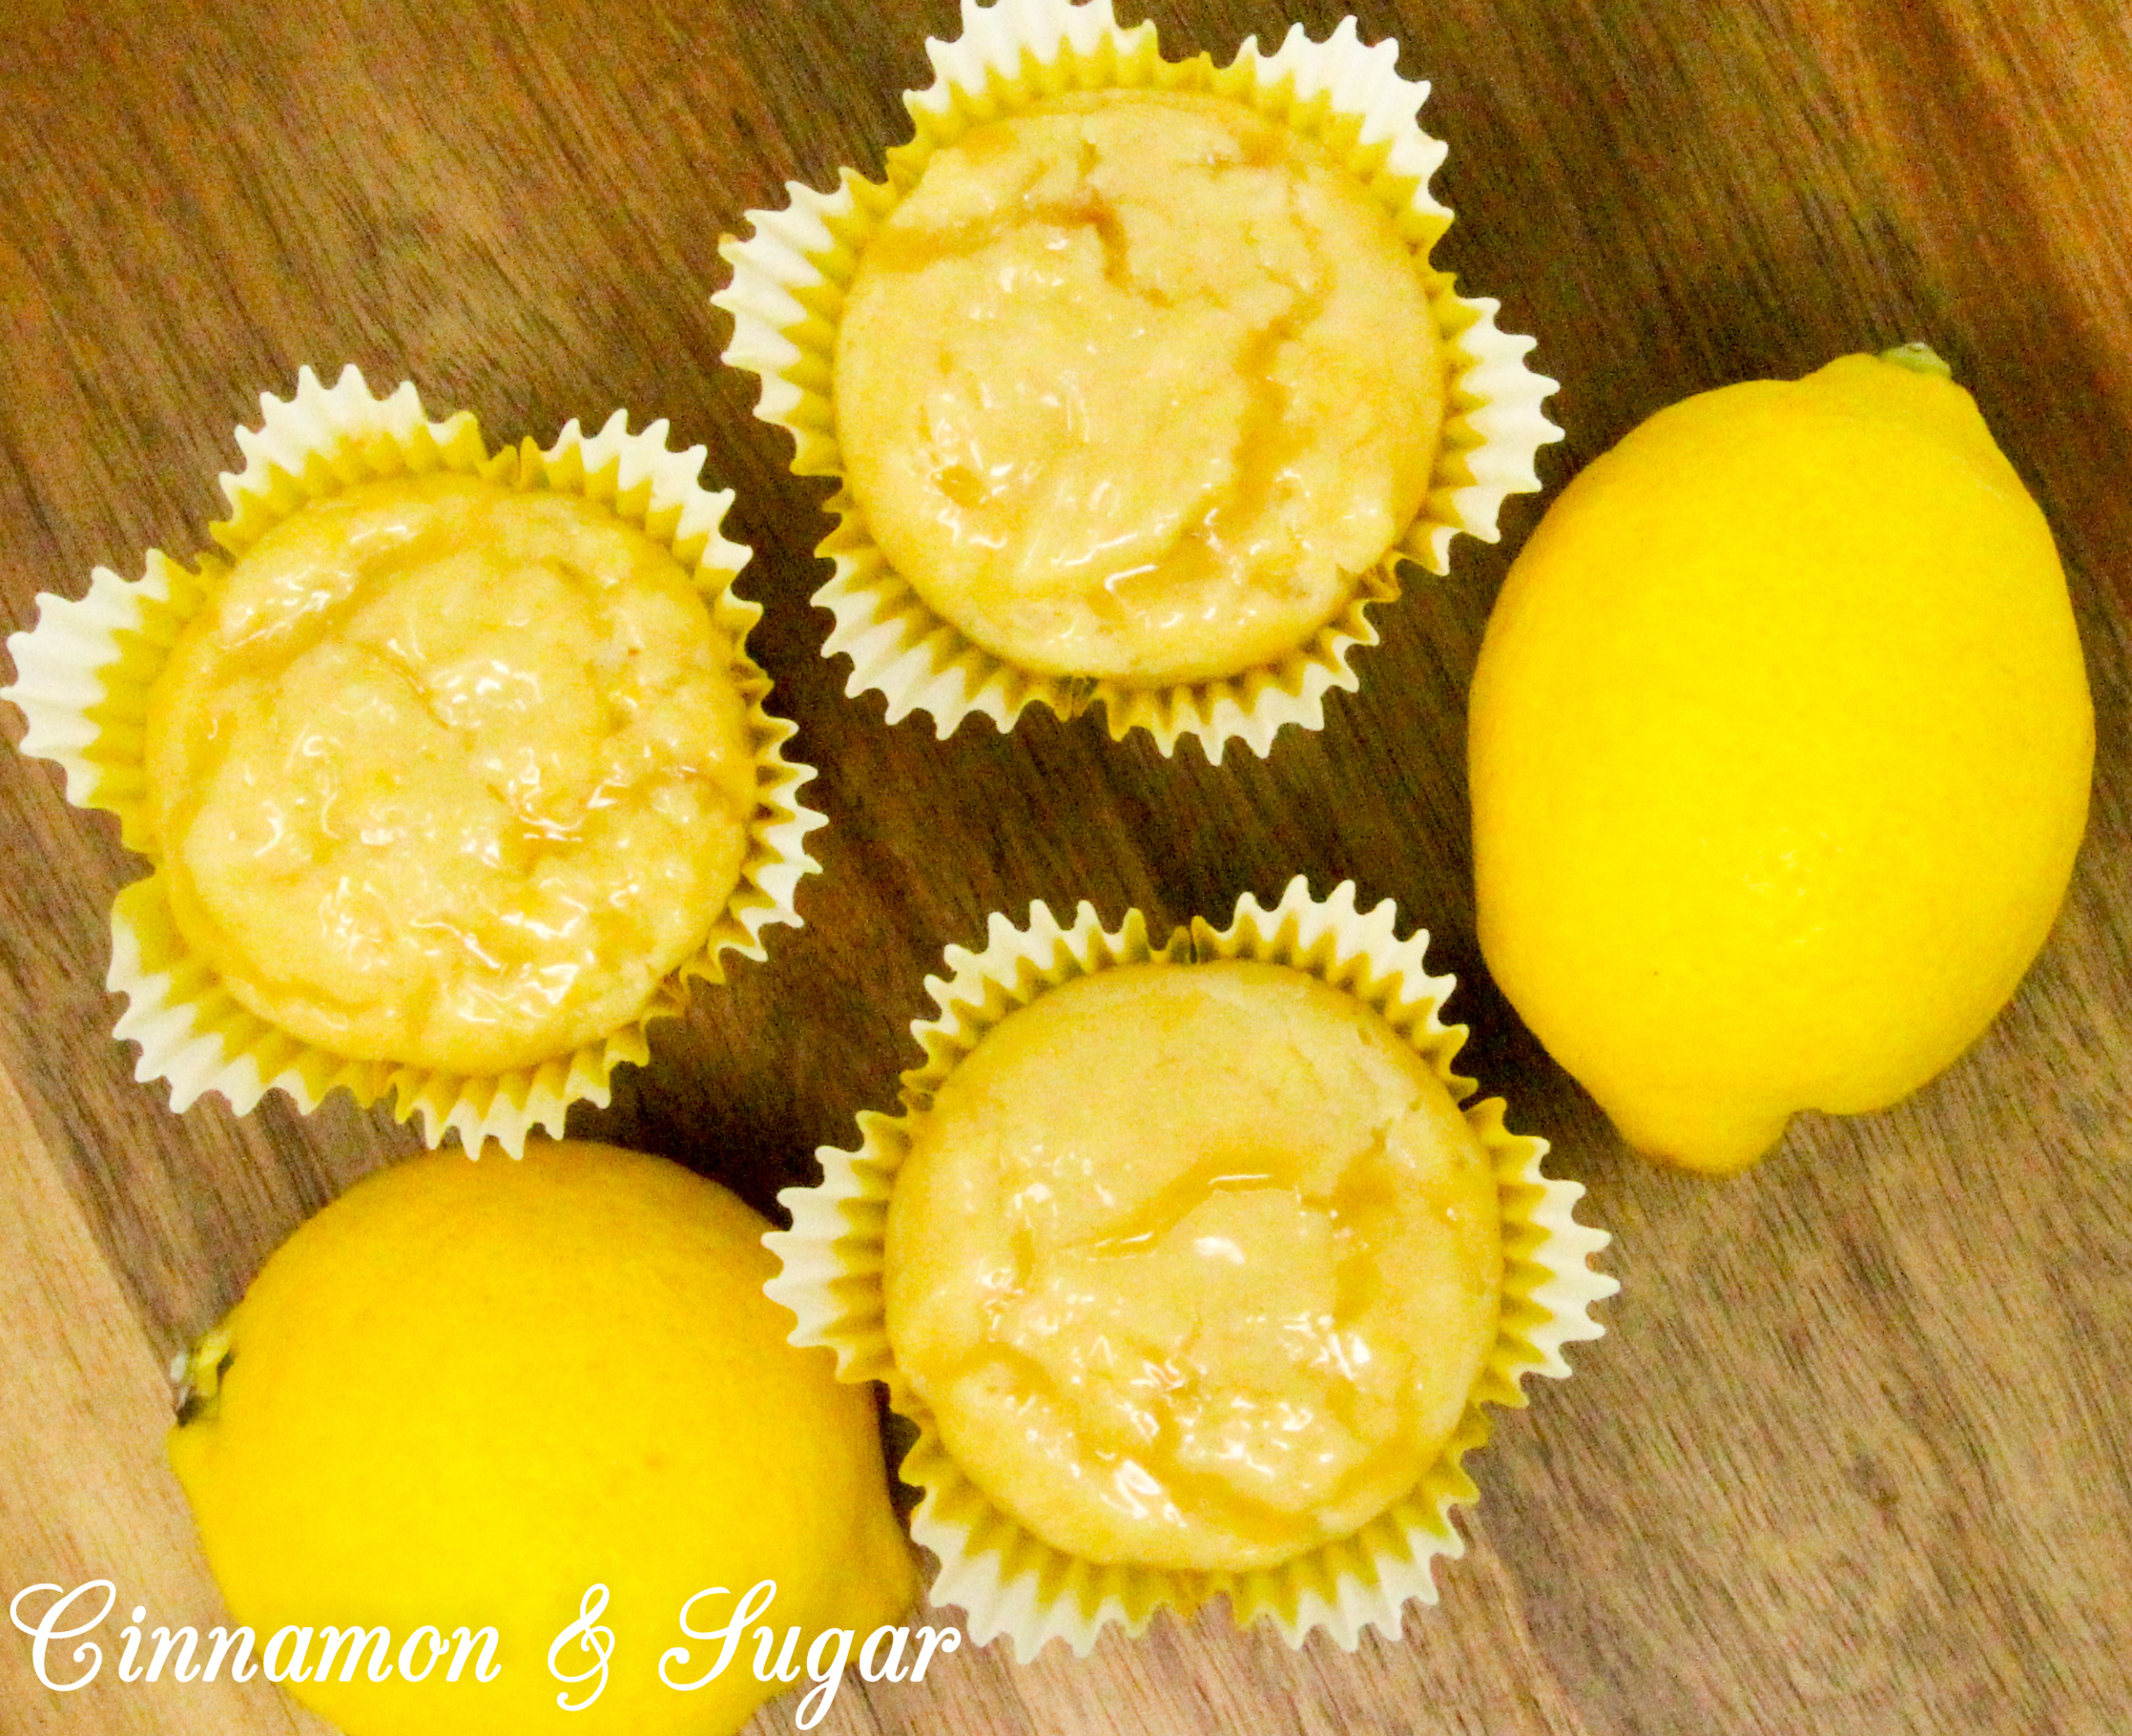 Lemon Curd Muffins are super moist and ultra flavorful thanks to the generous amounts of lemon zest, lemon juice, and lemon curd! A delicious treat for breakfast and snack time, or serve with a dollop of ice cream for dessert. Recipe shared with permission granted by Libby Klein, author of WINE TASTINGS ARE MURDER.